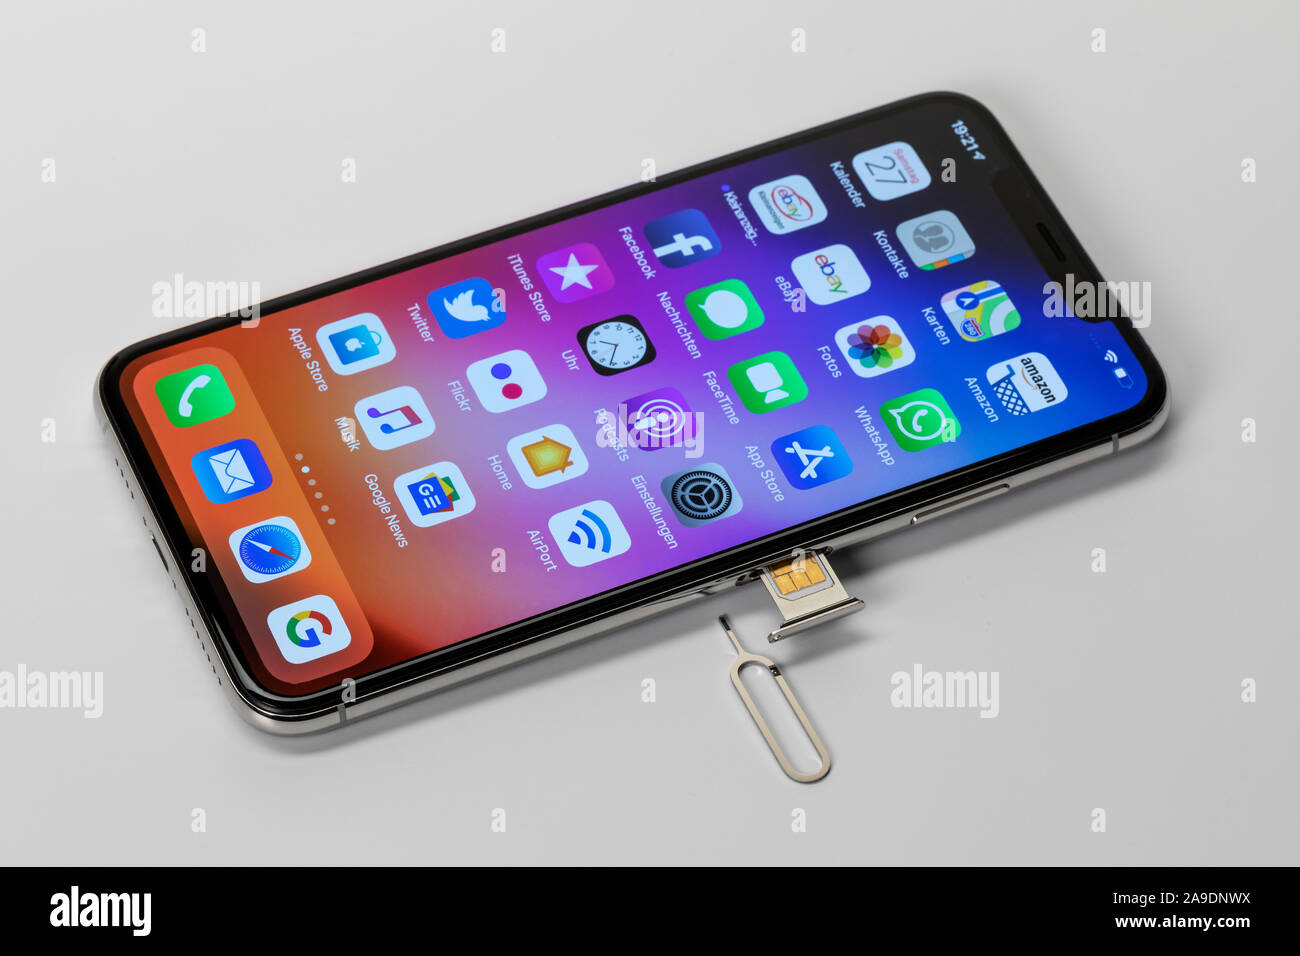 Iphone Nano Sim High Resolution Stock Photography and Images - Alamy